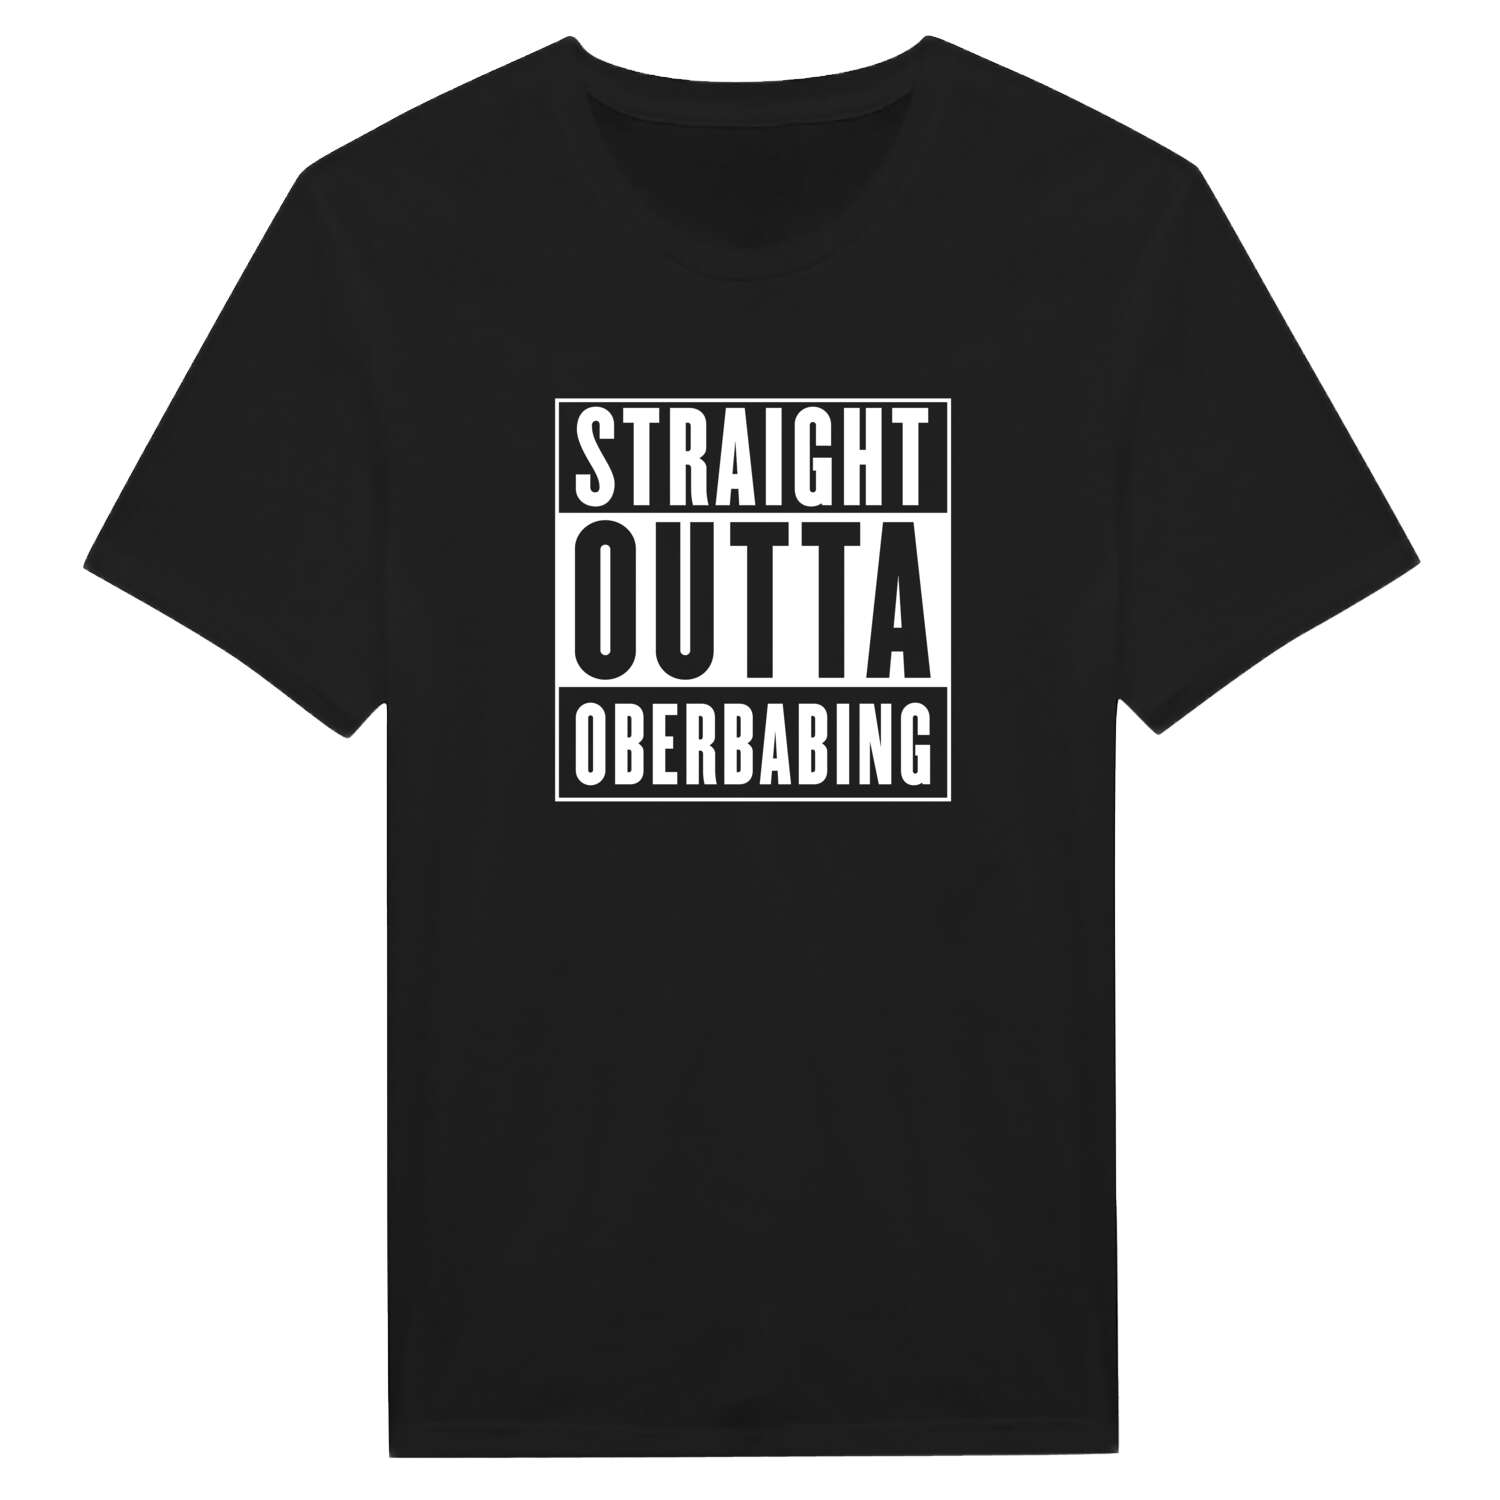 Oberbabing T-Shirt »Straight Outta«